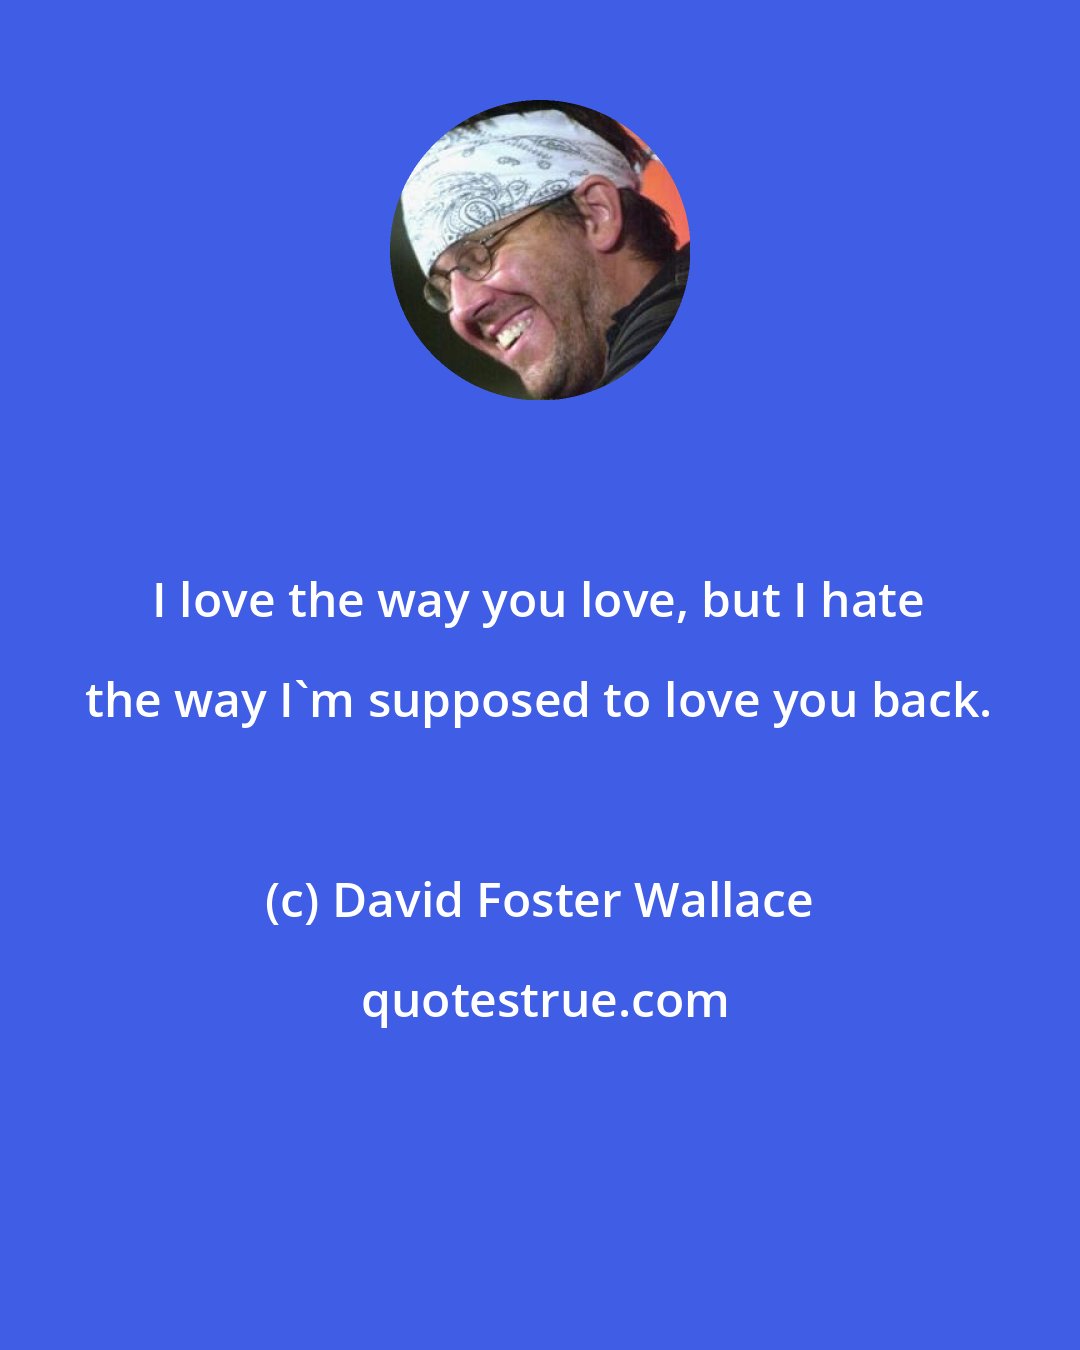 David Foster Wallace: I love the way you love, but I hate the way I'm supposed to love you back.